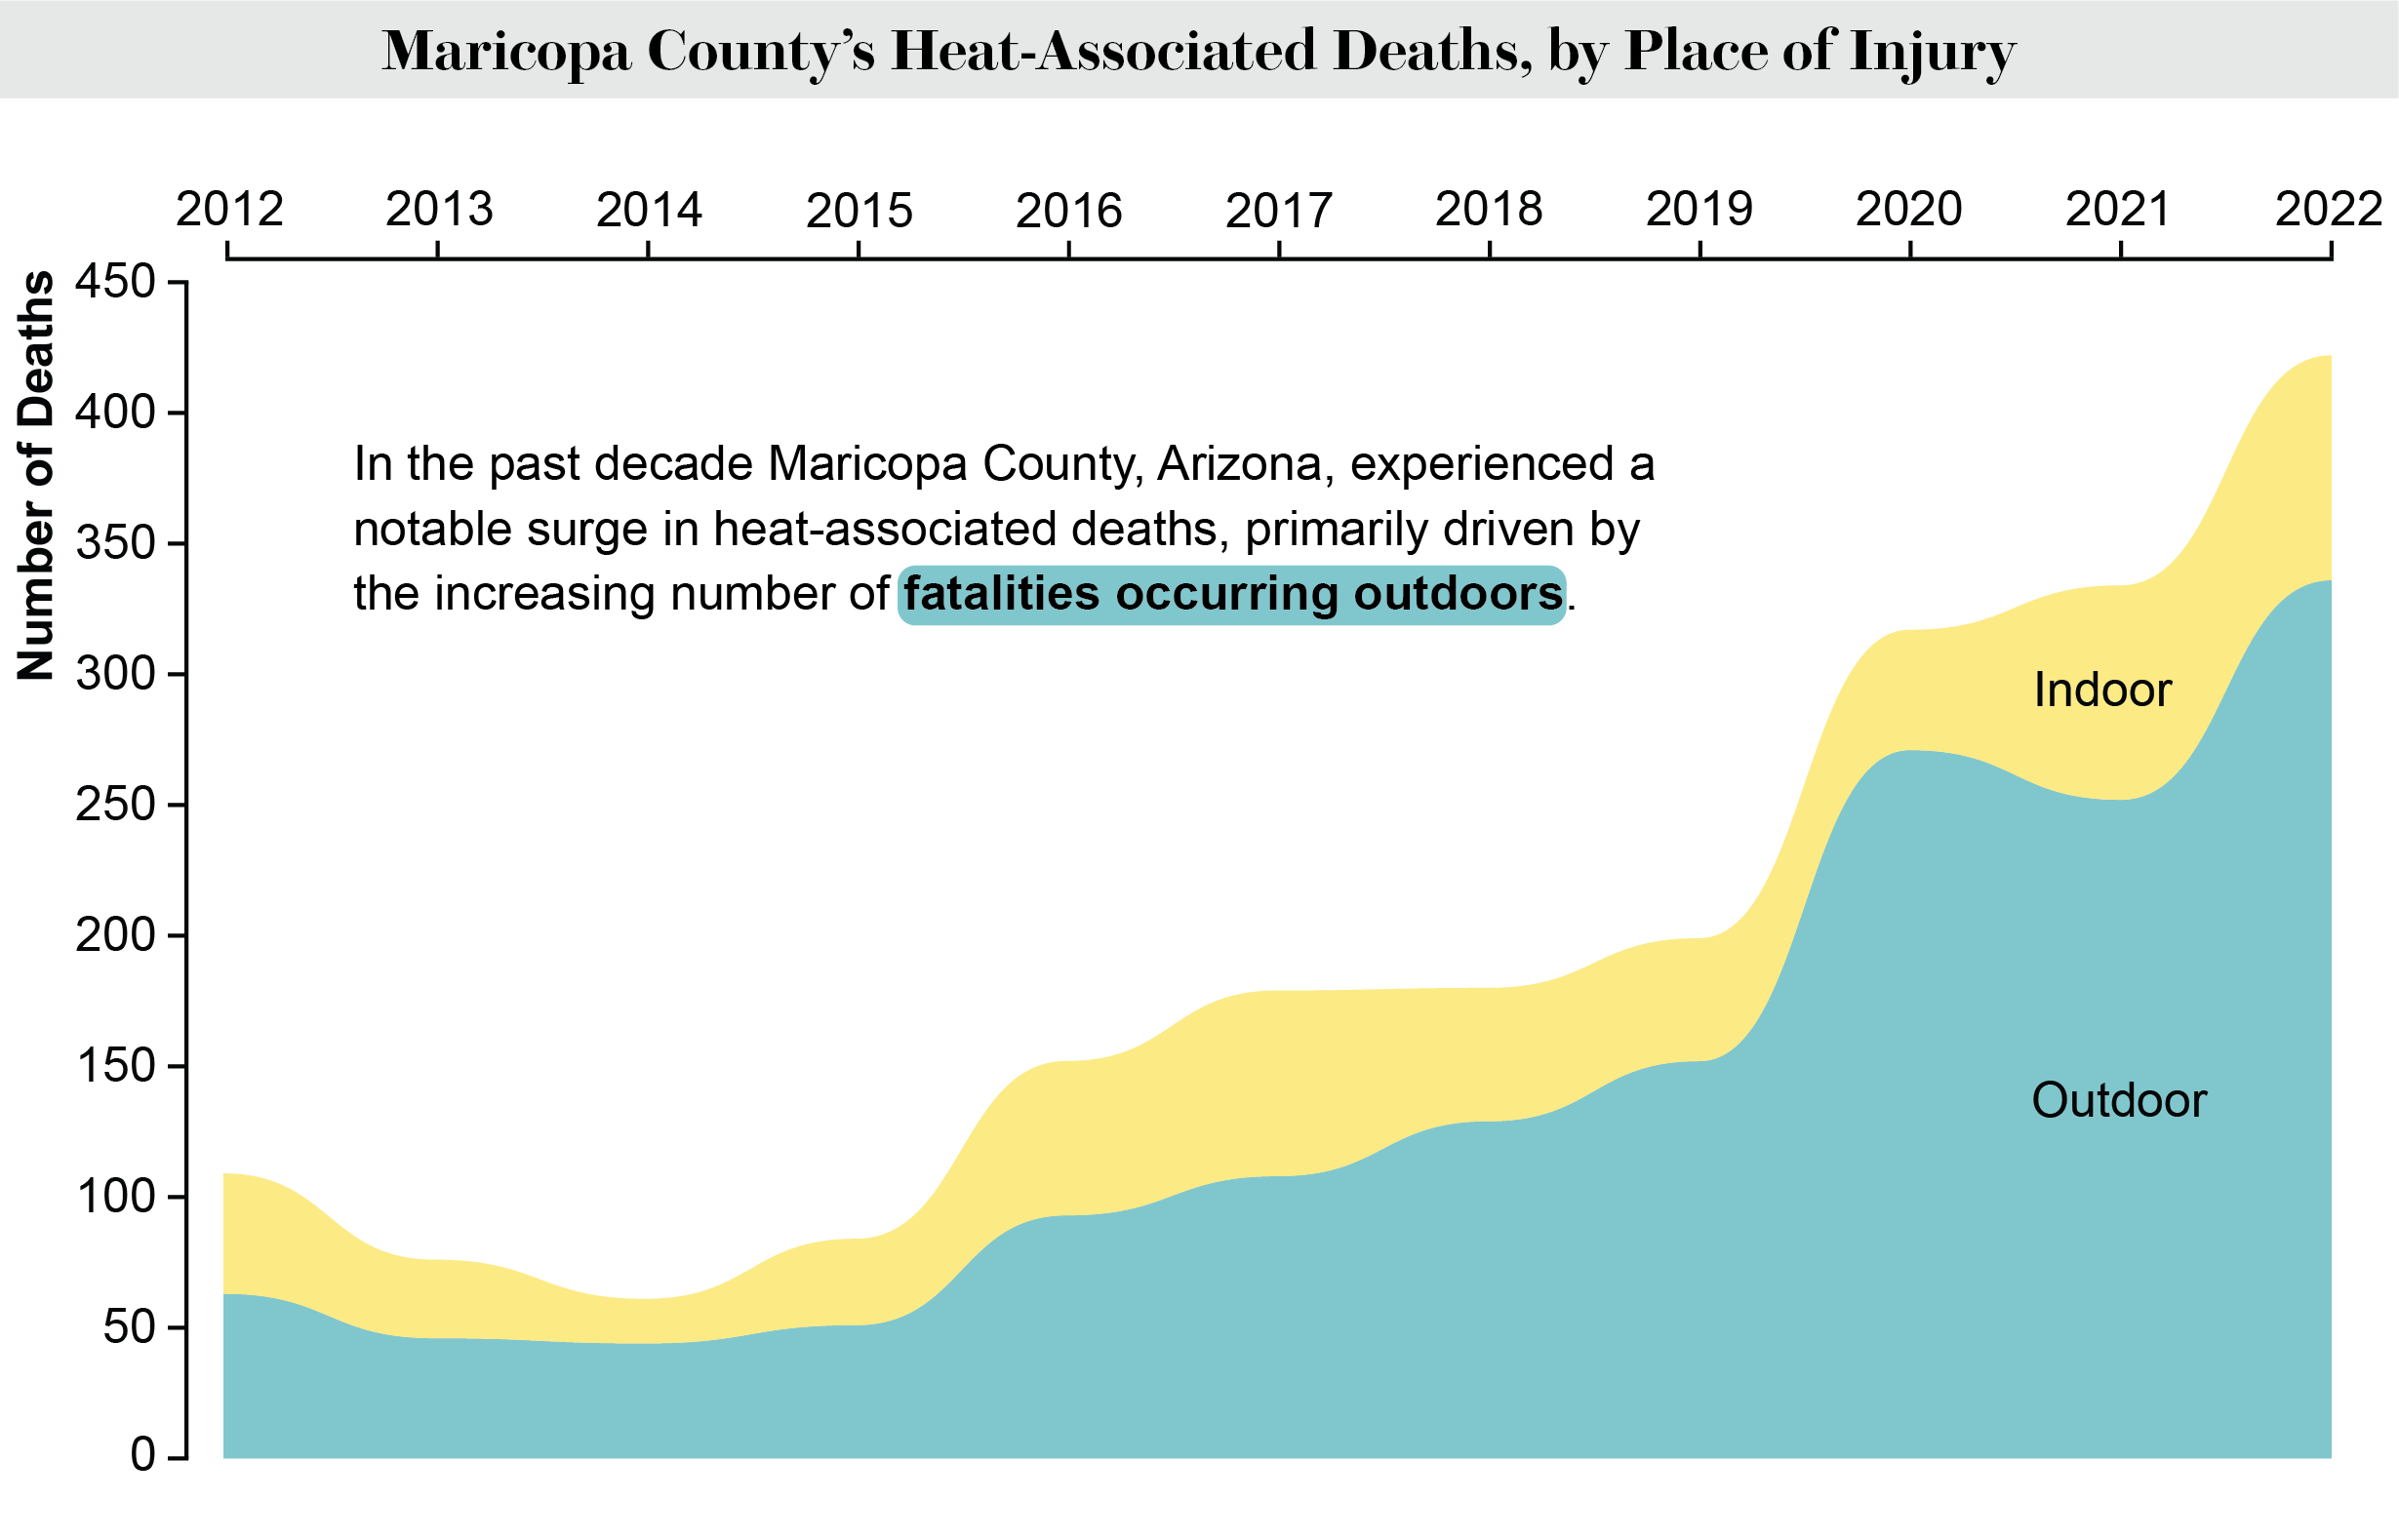 An area chart shows Maricopa County, Arizona’s heat-associated deaths from 2012 to 2022, categorized by indoor or outdoor injury.